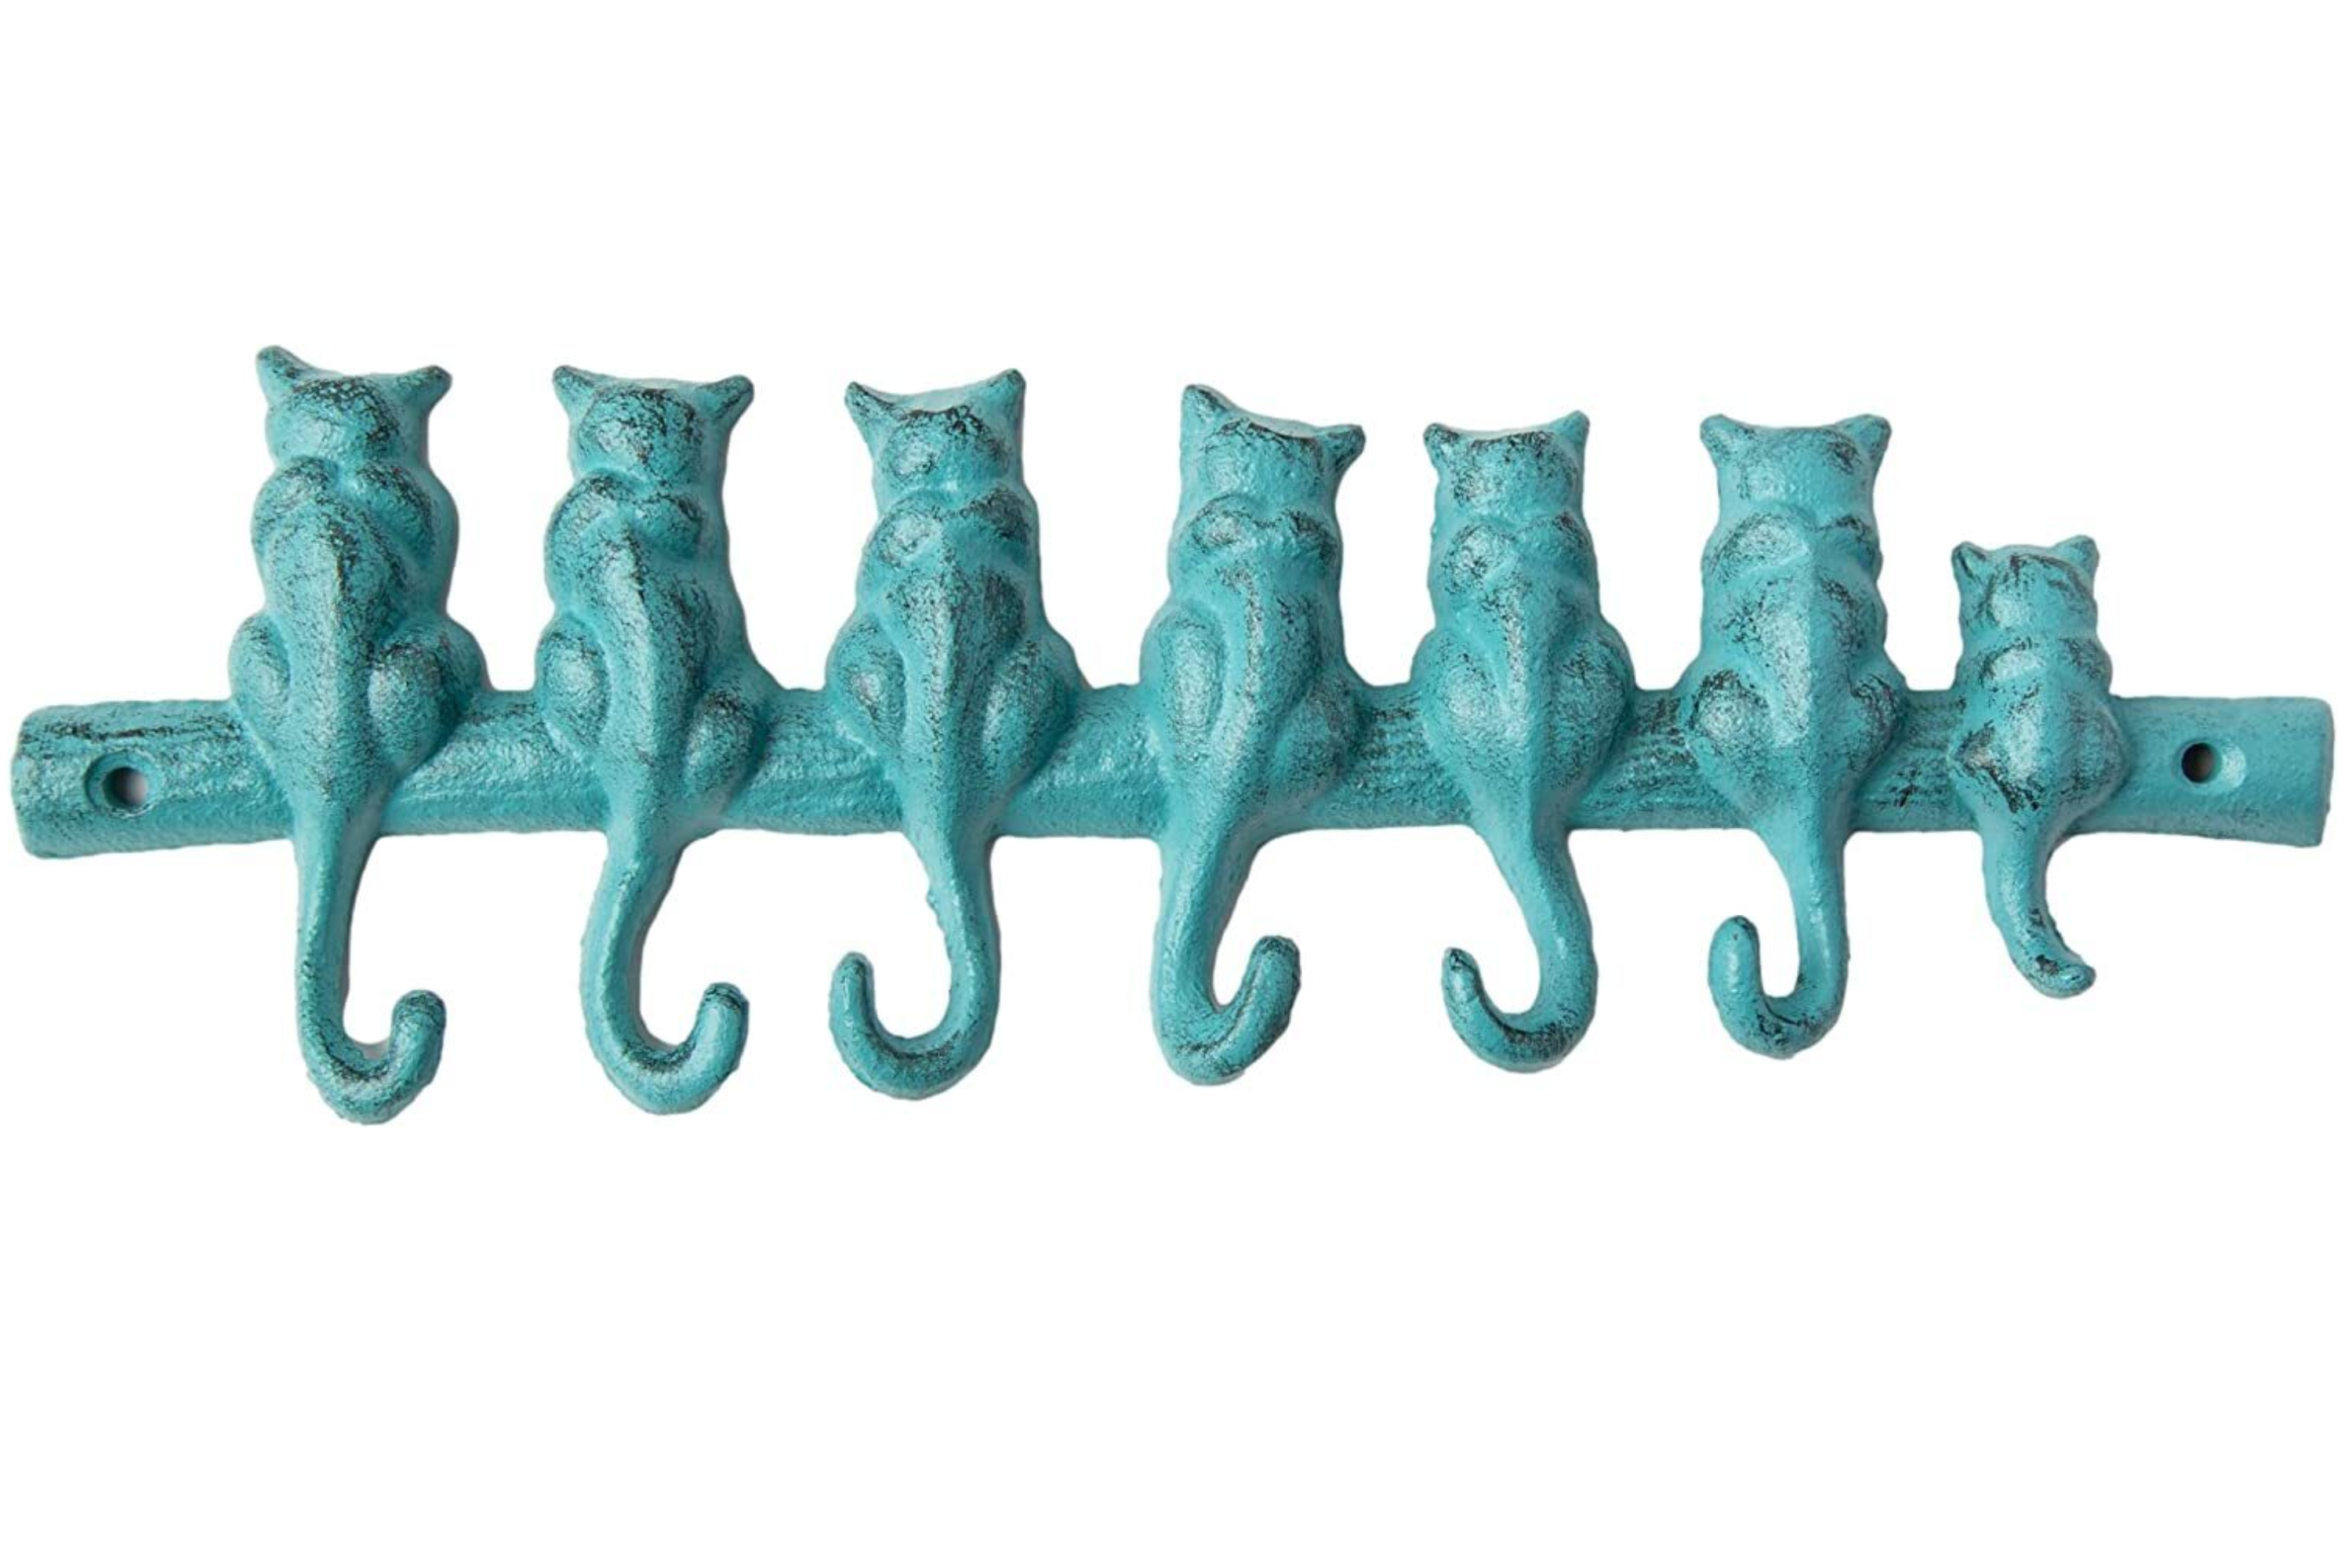 Comfify 7 Cats Cast Iron Wall Hanger - Decorative Cast Iron Wall Hook Rack - Vintage Design Hanger with 7 Hooks - Wall Mounted | 12.4 x 3.9 - with SCR